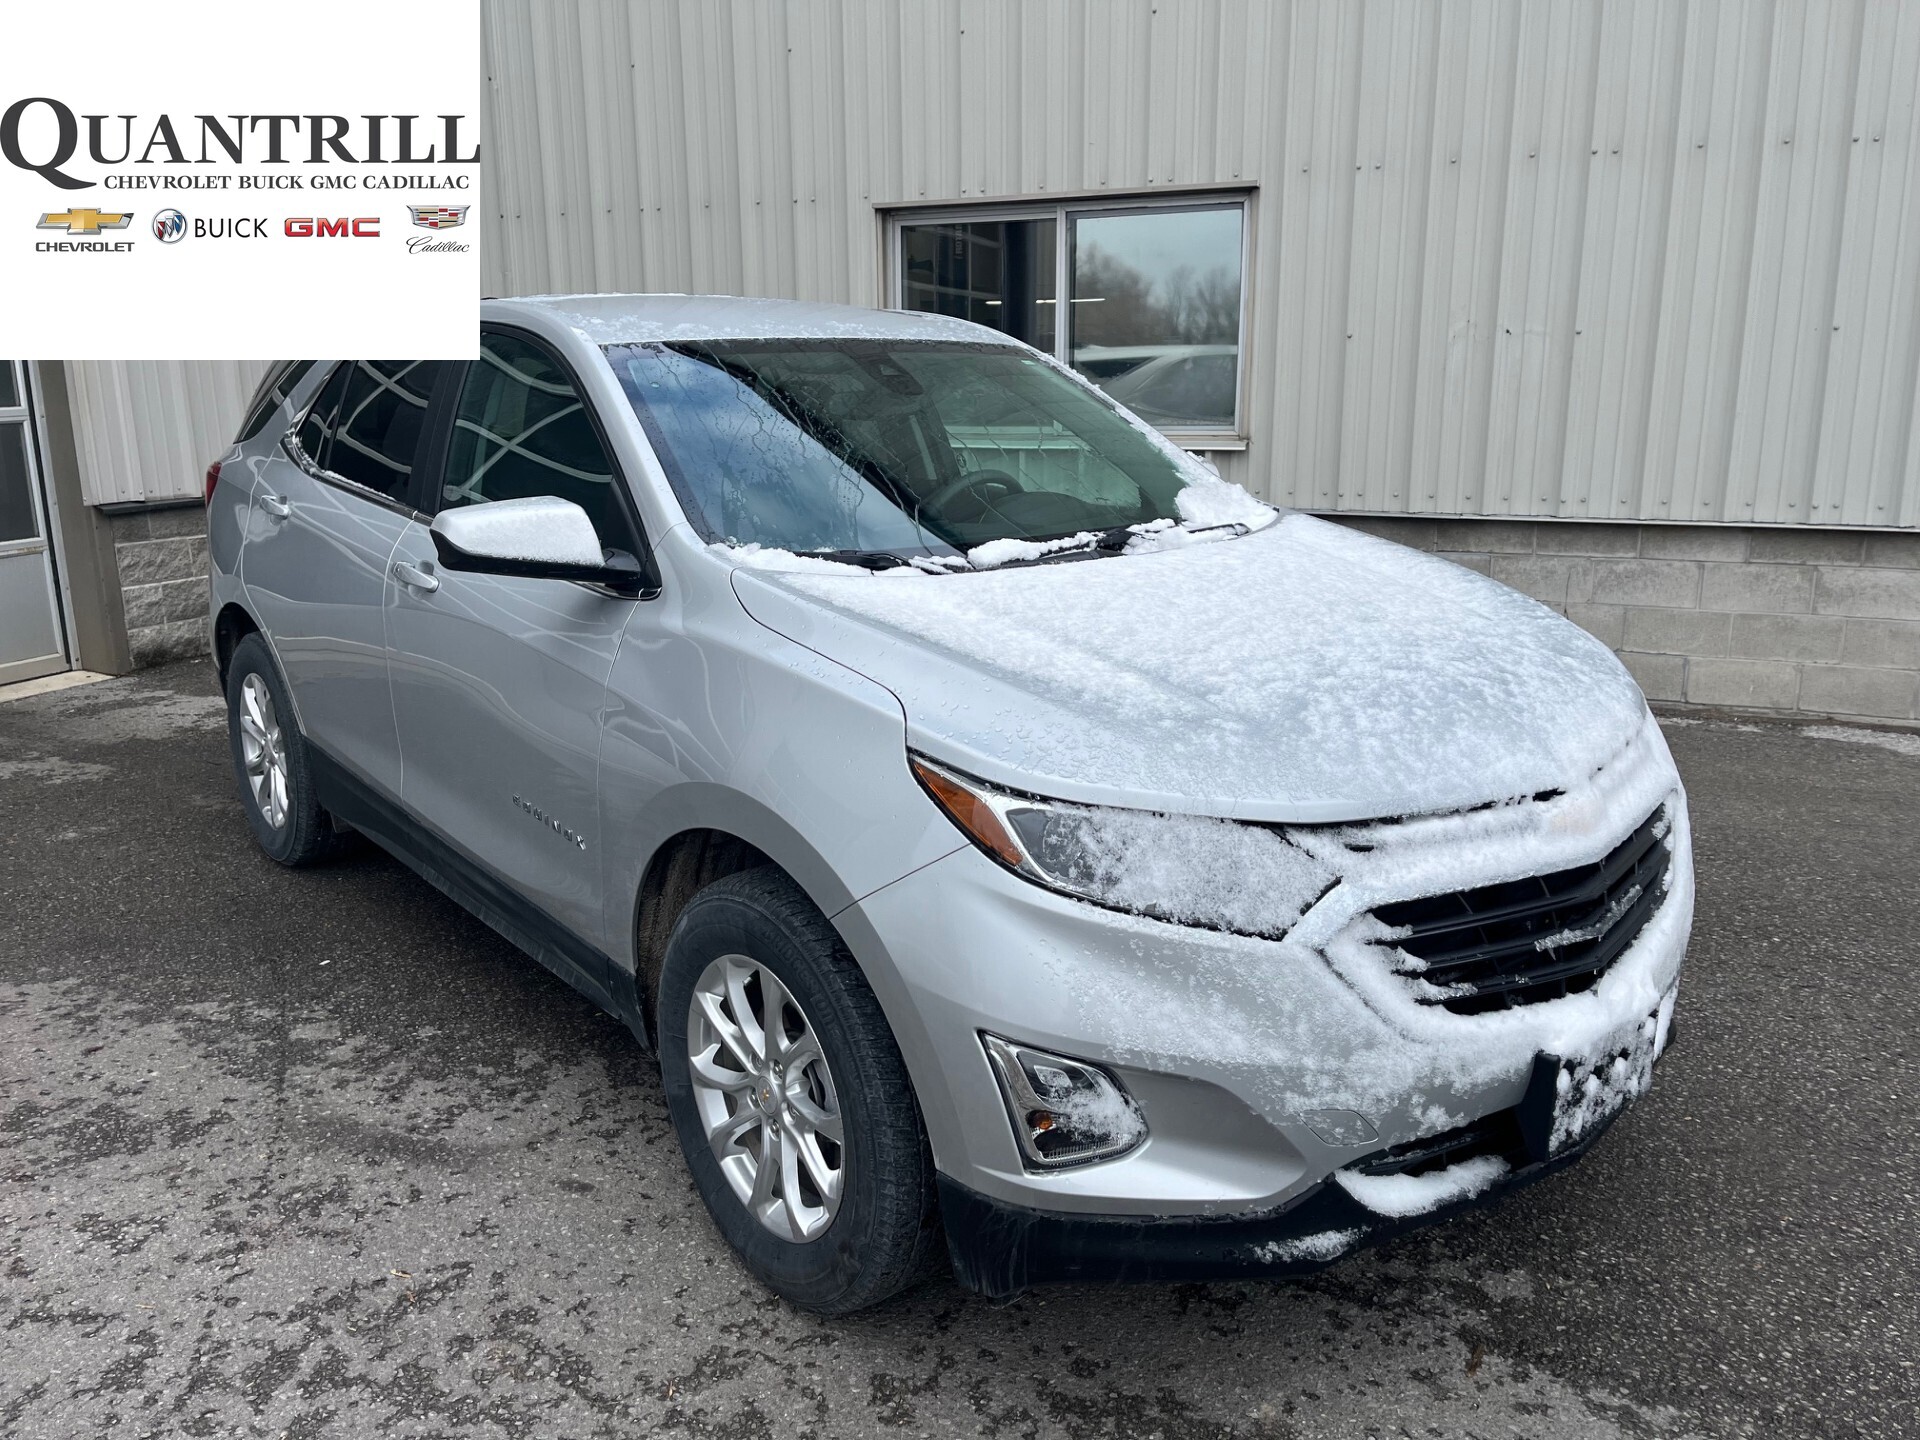 2021 Chevrolet Equinox LT AWD + 1.5L + Heated Seats + Cruise + One Owner